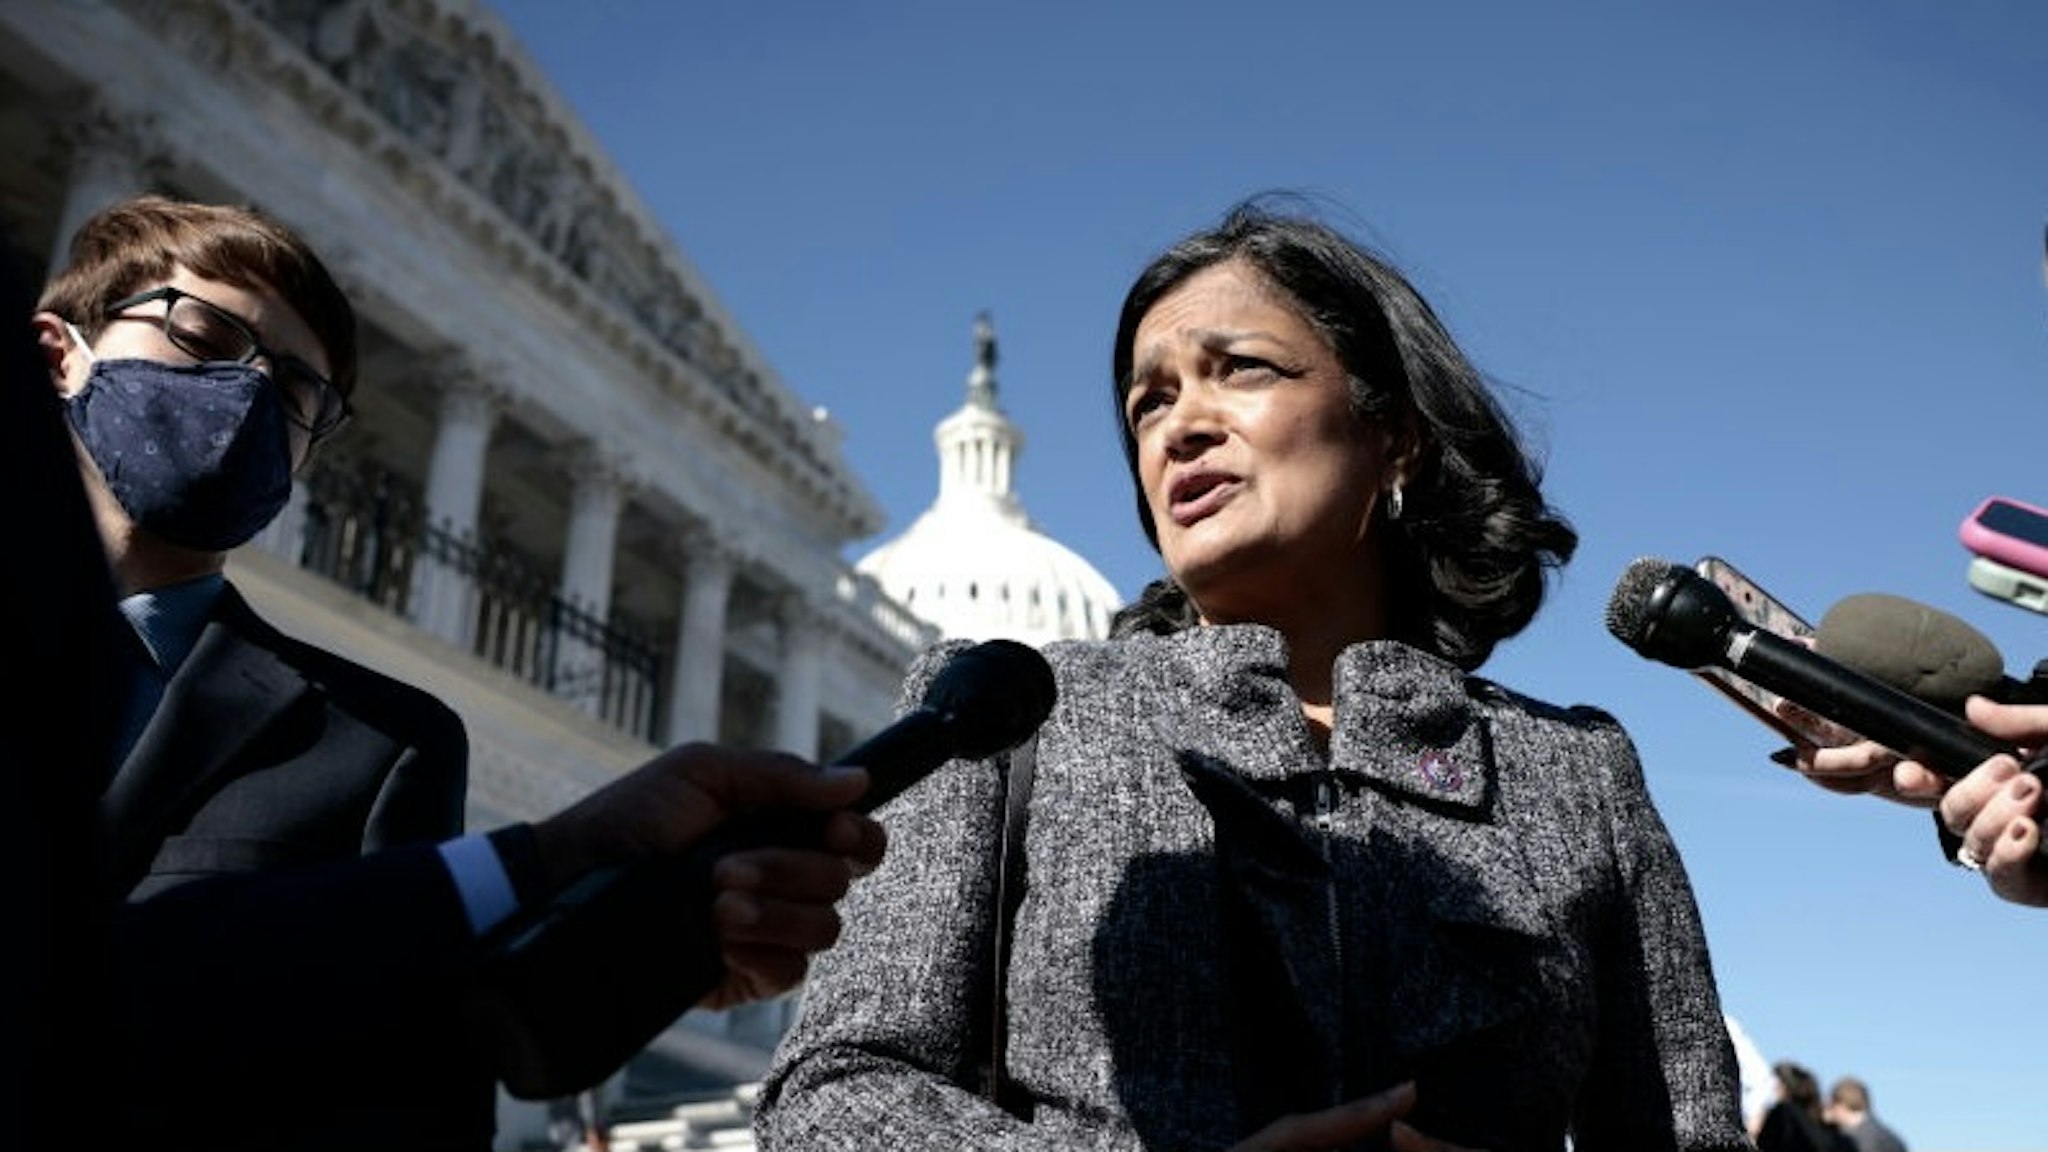 Lawmakers Work On Capitol Hill WASHINGTON, DC - NOVEMBER 18: Chair of the Congressional Progressive Caucus Rep. Pramila Jayapal (D-WA) speaks with reporters outside the U.S. Capitol Building on November 18, 2021 in Washington, DC. DC. Democratic leaders in the House are waiting on the final Congressional Budget Office cost estimate for President Joe Biden's Build Back Better before scheduling a vote on the $1.75 trillion social benefits and climate legislation. (Photo by Anna Moneymaker/Getty Images) Anna Moneymaker / Staff